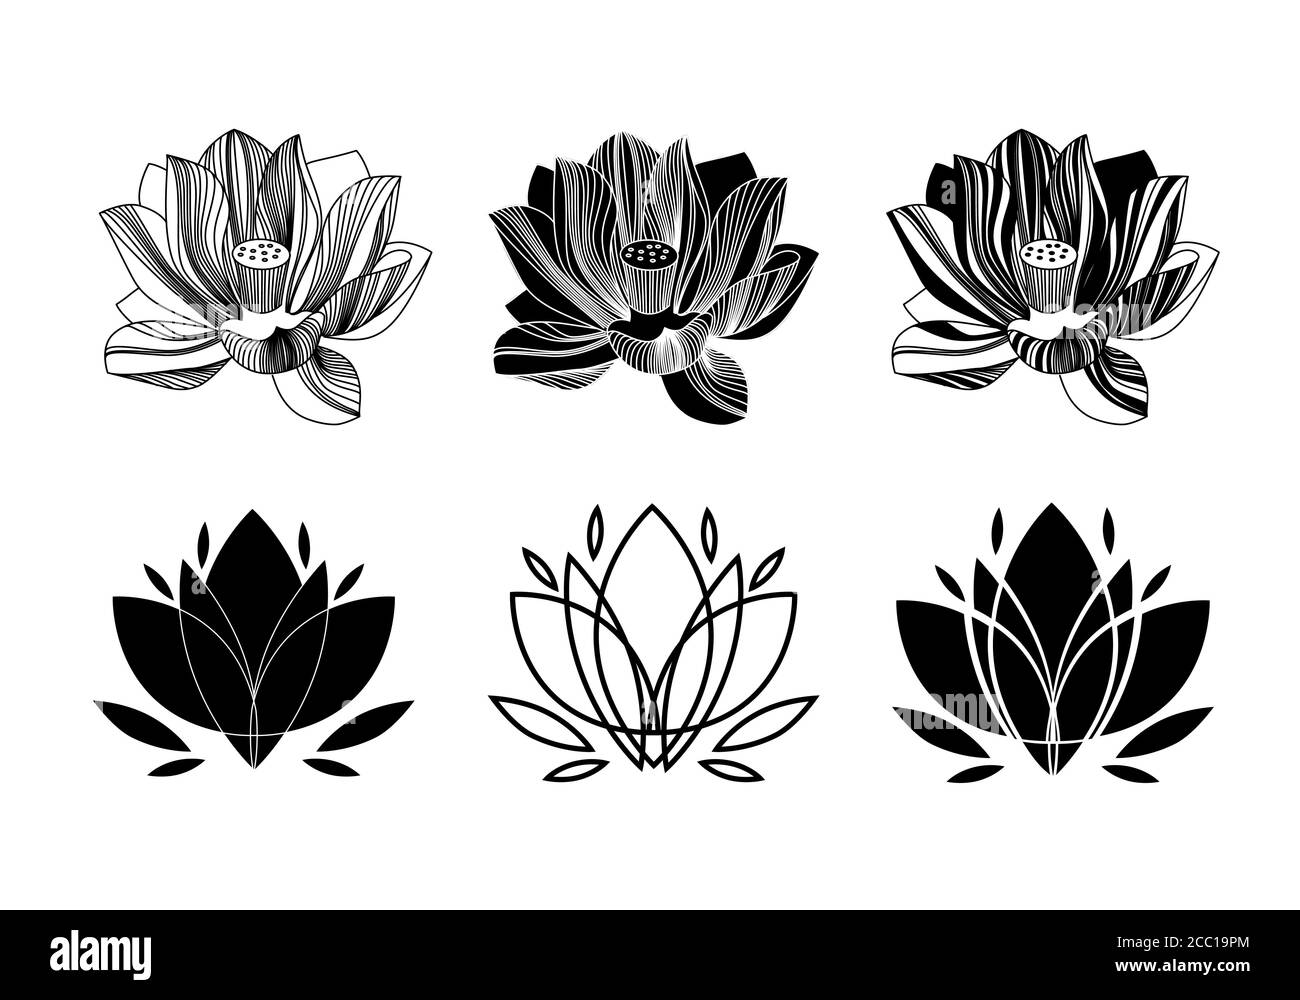 Water Lily Illustration Black and White Stock Photos & Images - Alamy